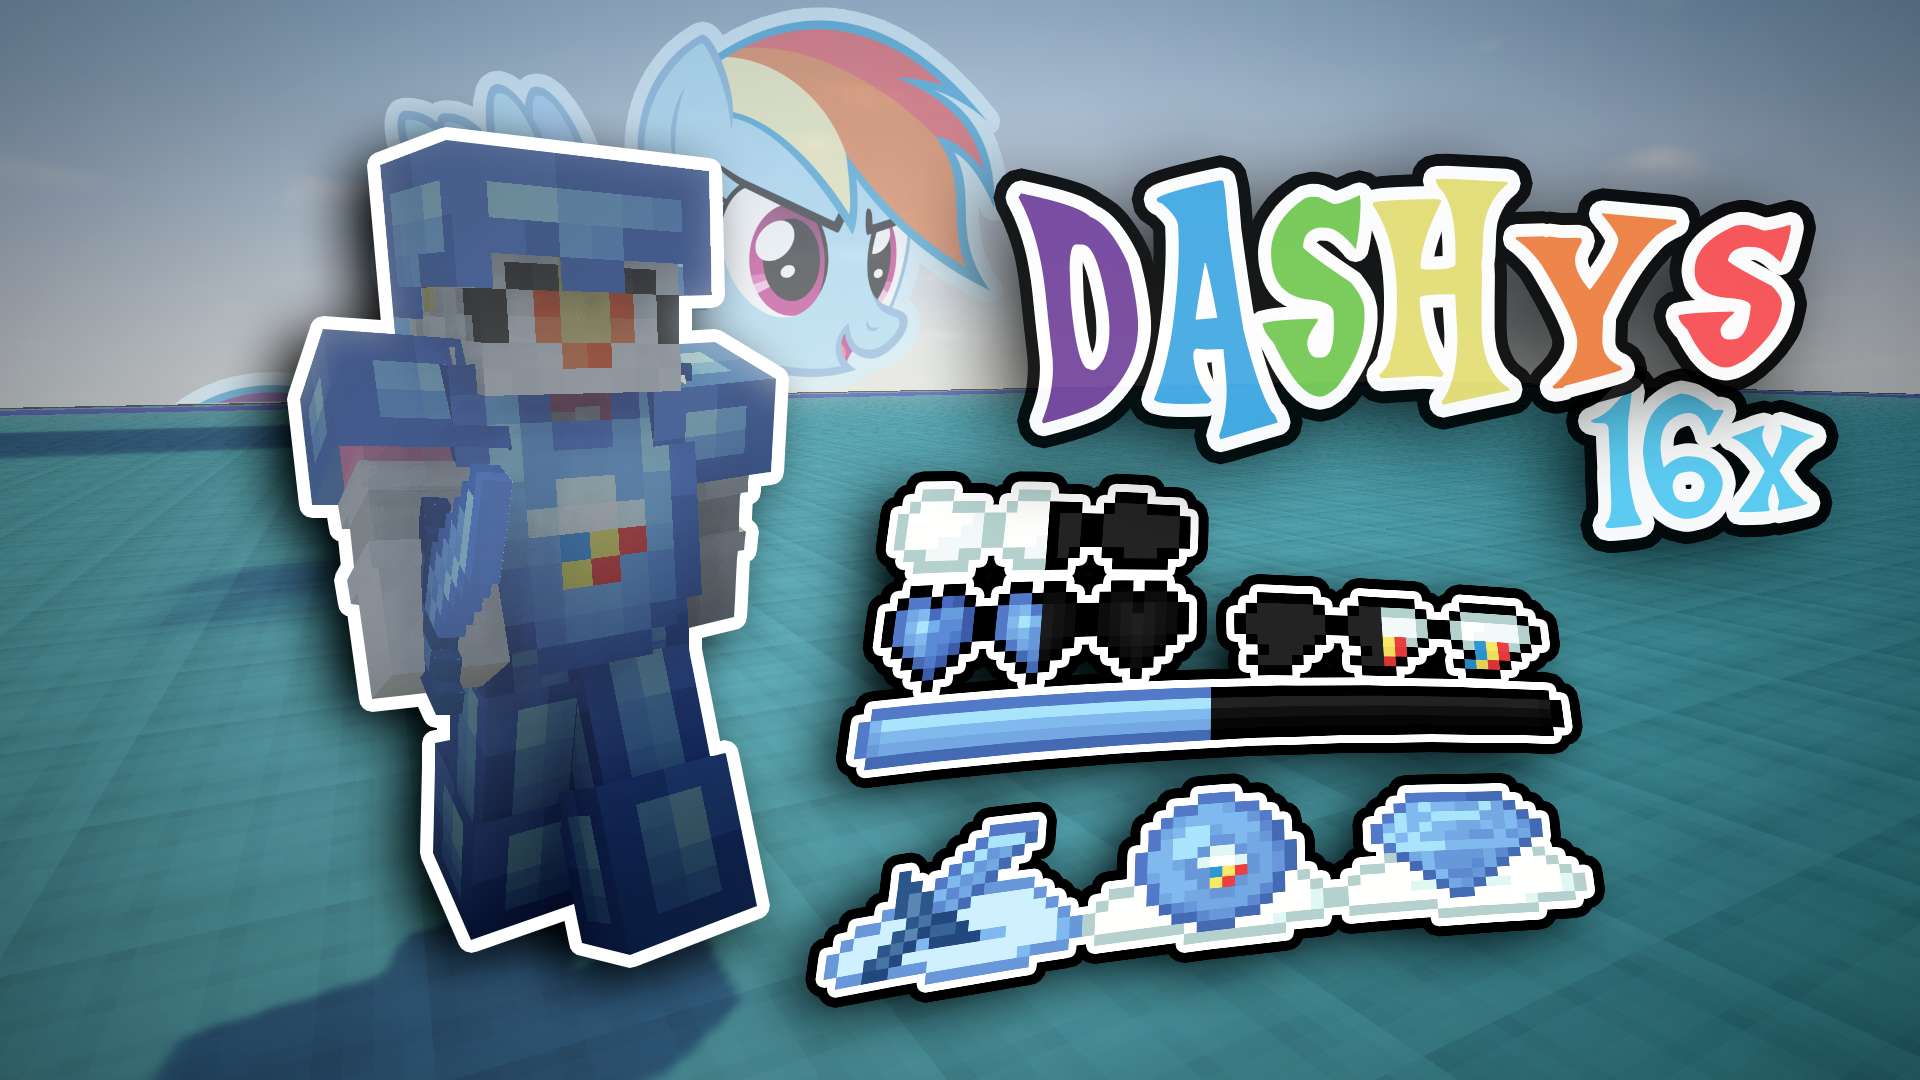 Dashys (Rainbow Dash Pack) 16x by Likorrne on PvPRP